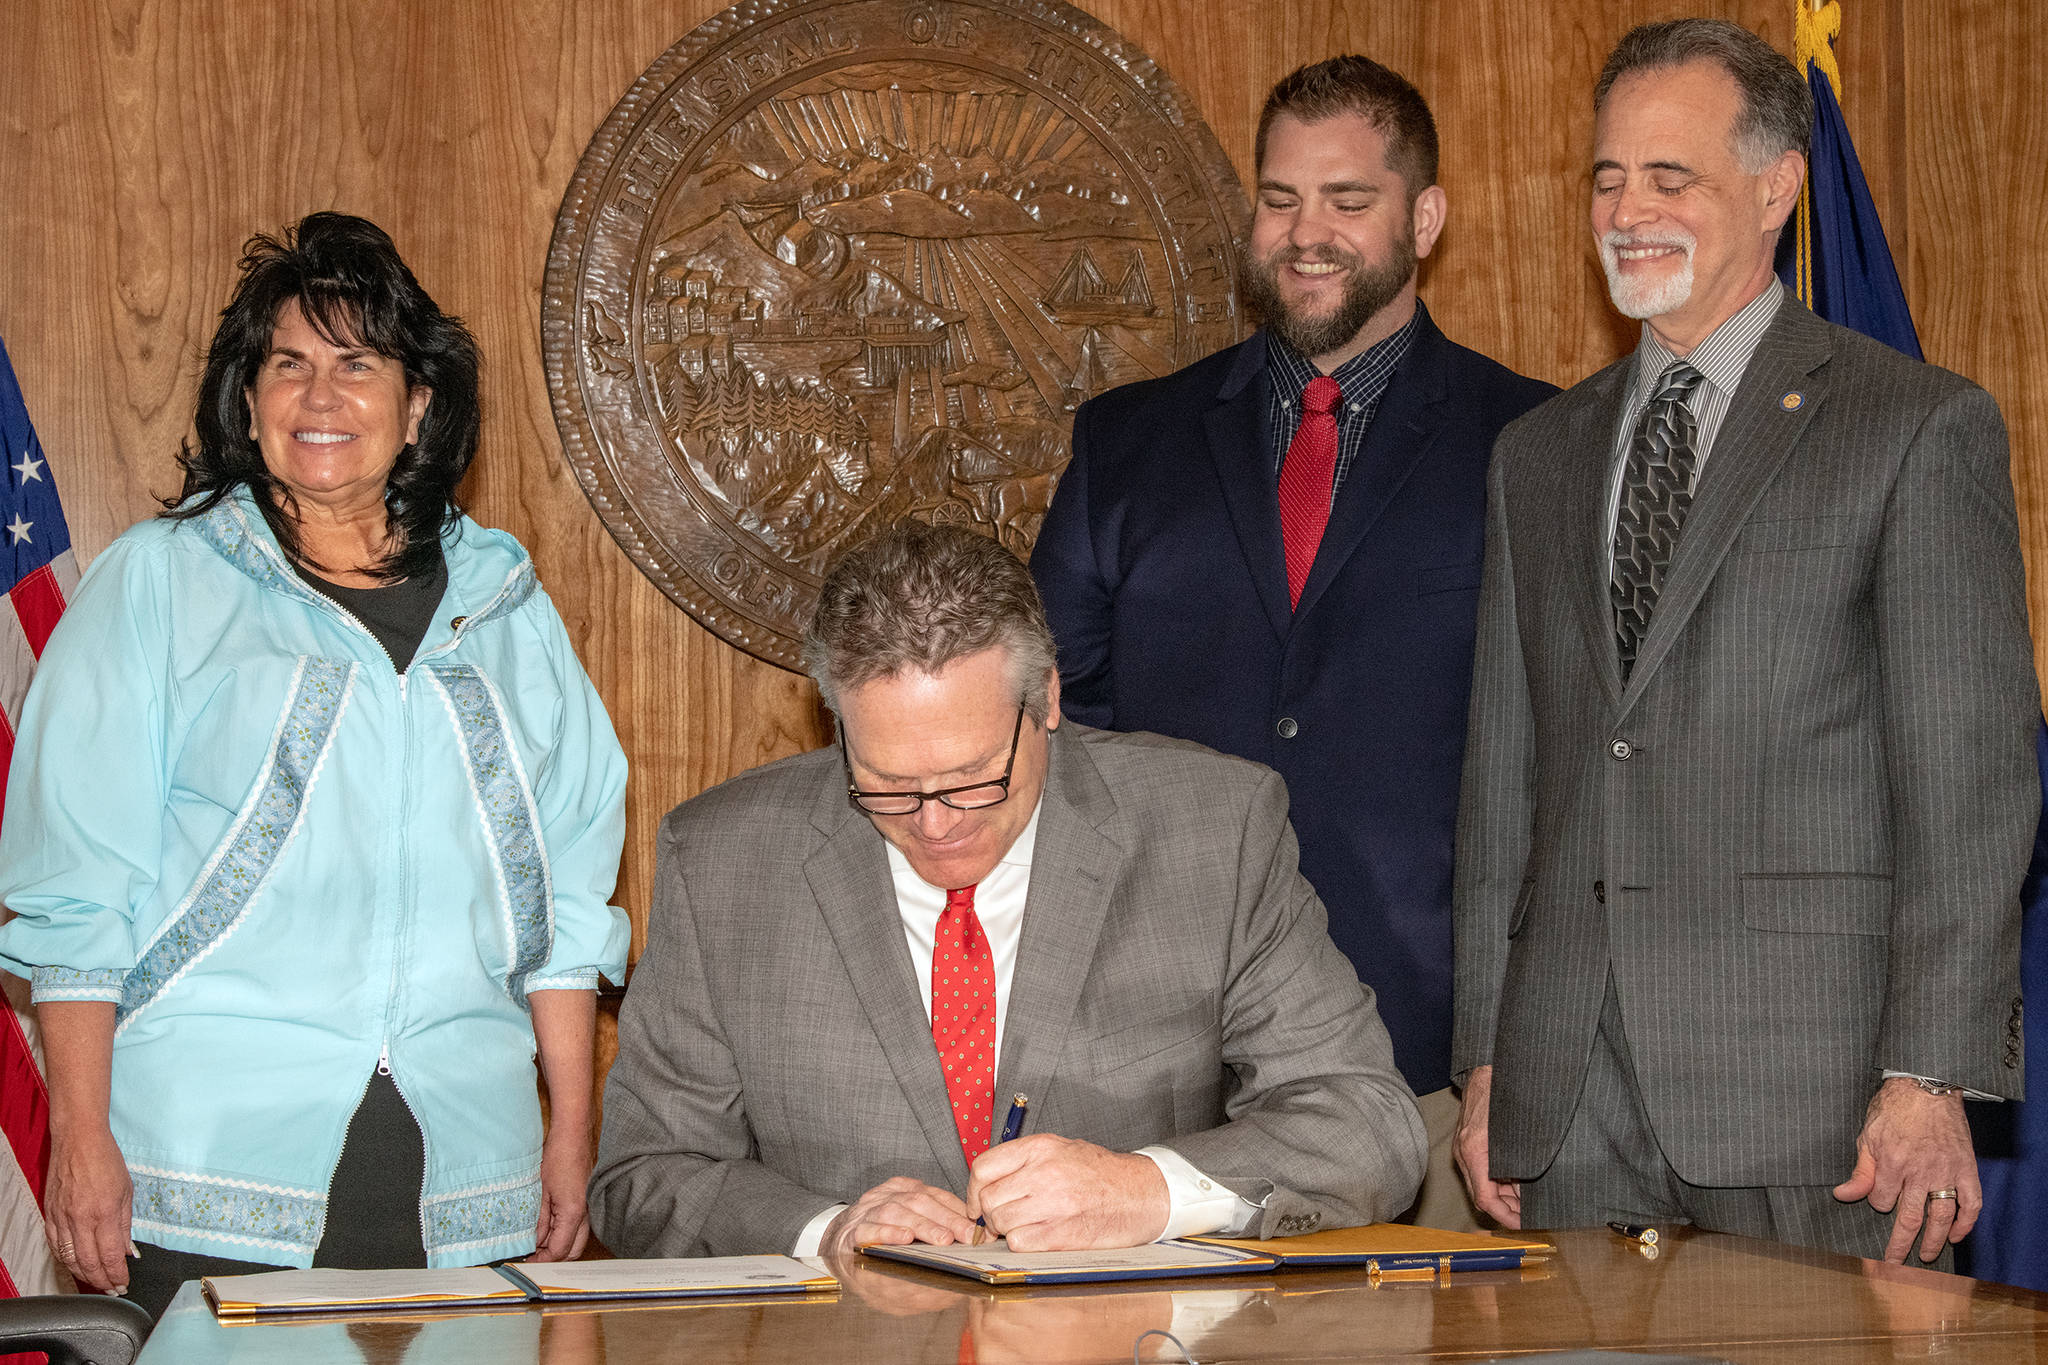 Gov. Mike Dunleavy (center) signs a proclamation ending the COVID-19 Emergency Declaration in the Alaska State Capitol on April 30, 2021. Dunleavy was joined by House Minority Leader Rep. Cathy Tilton, R-Wasilla (left) DHSS Commissioner Adam Crum(right), and Senate President Peter Micciche, R-Soldotna(far right). (Courtesy Photo / Office of Gov. Mike Dunleavy)